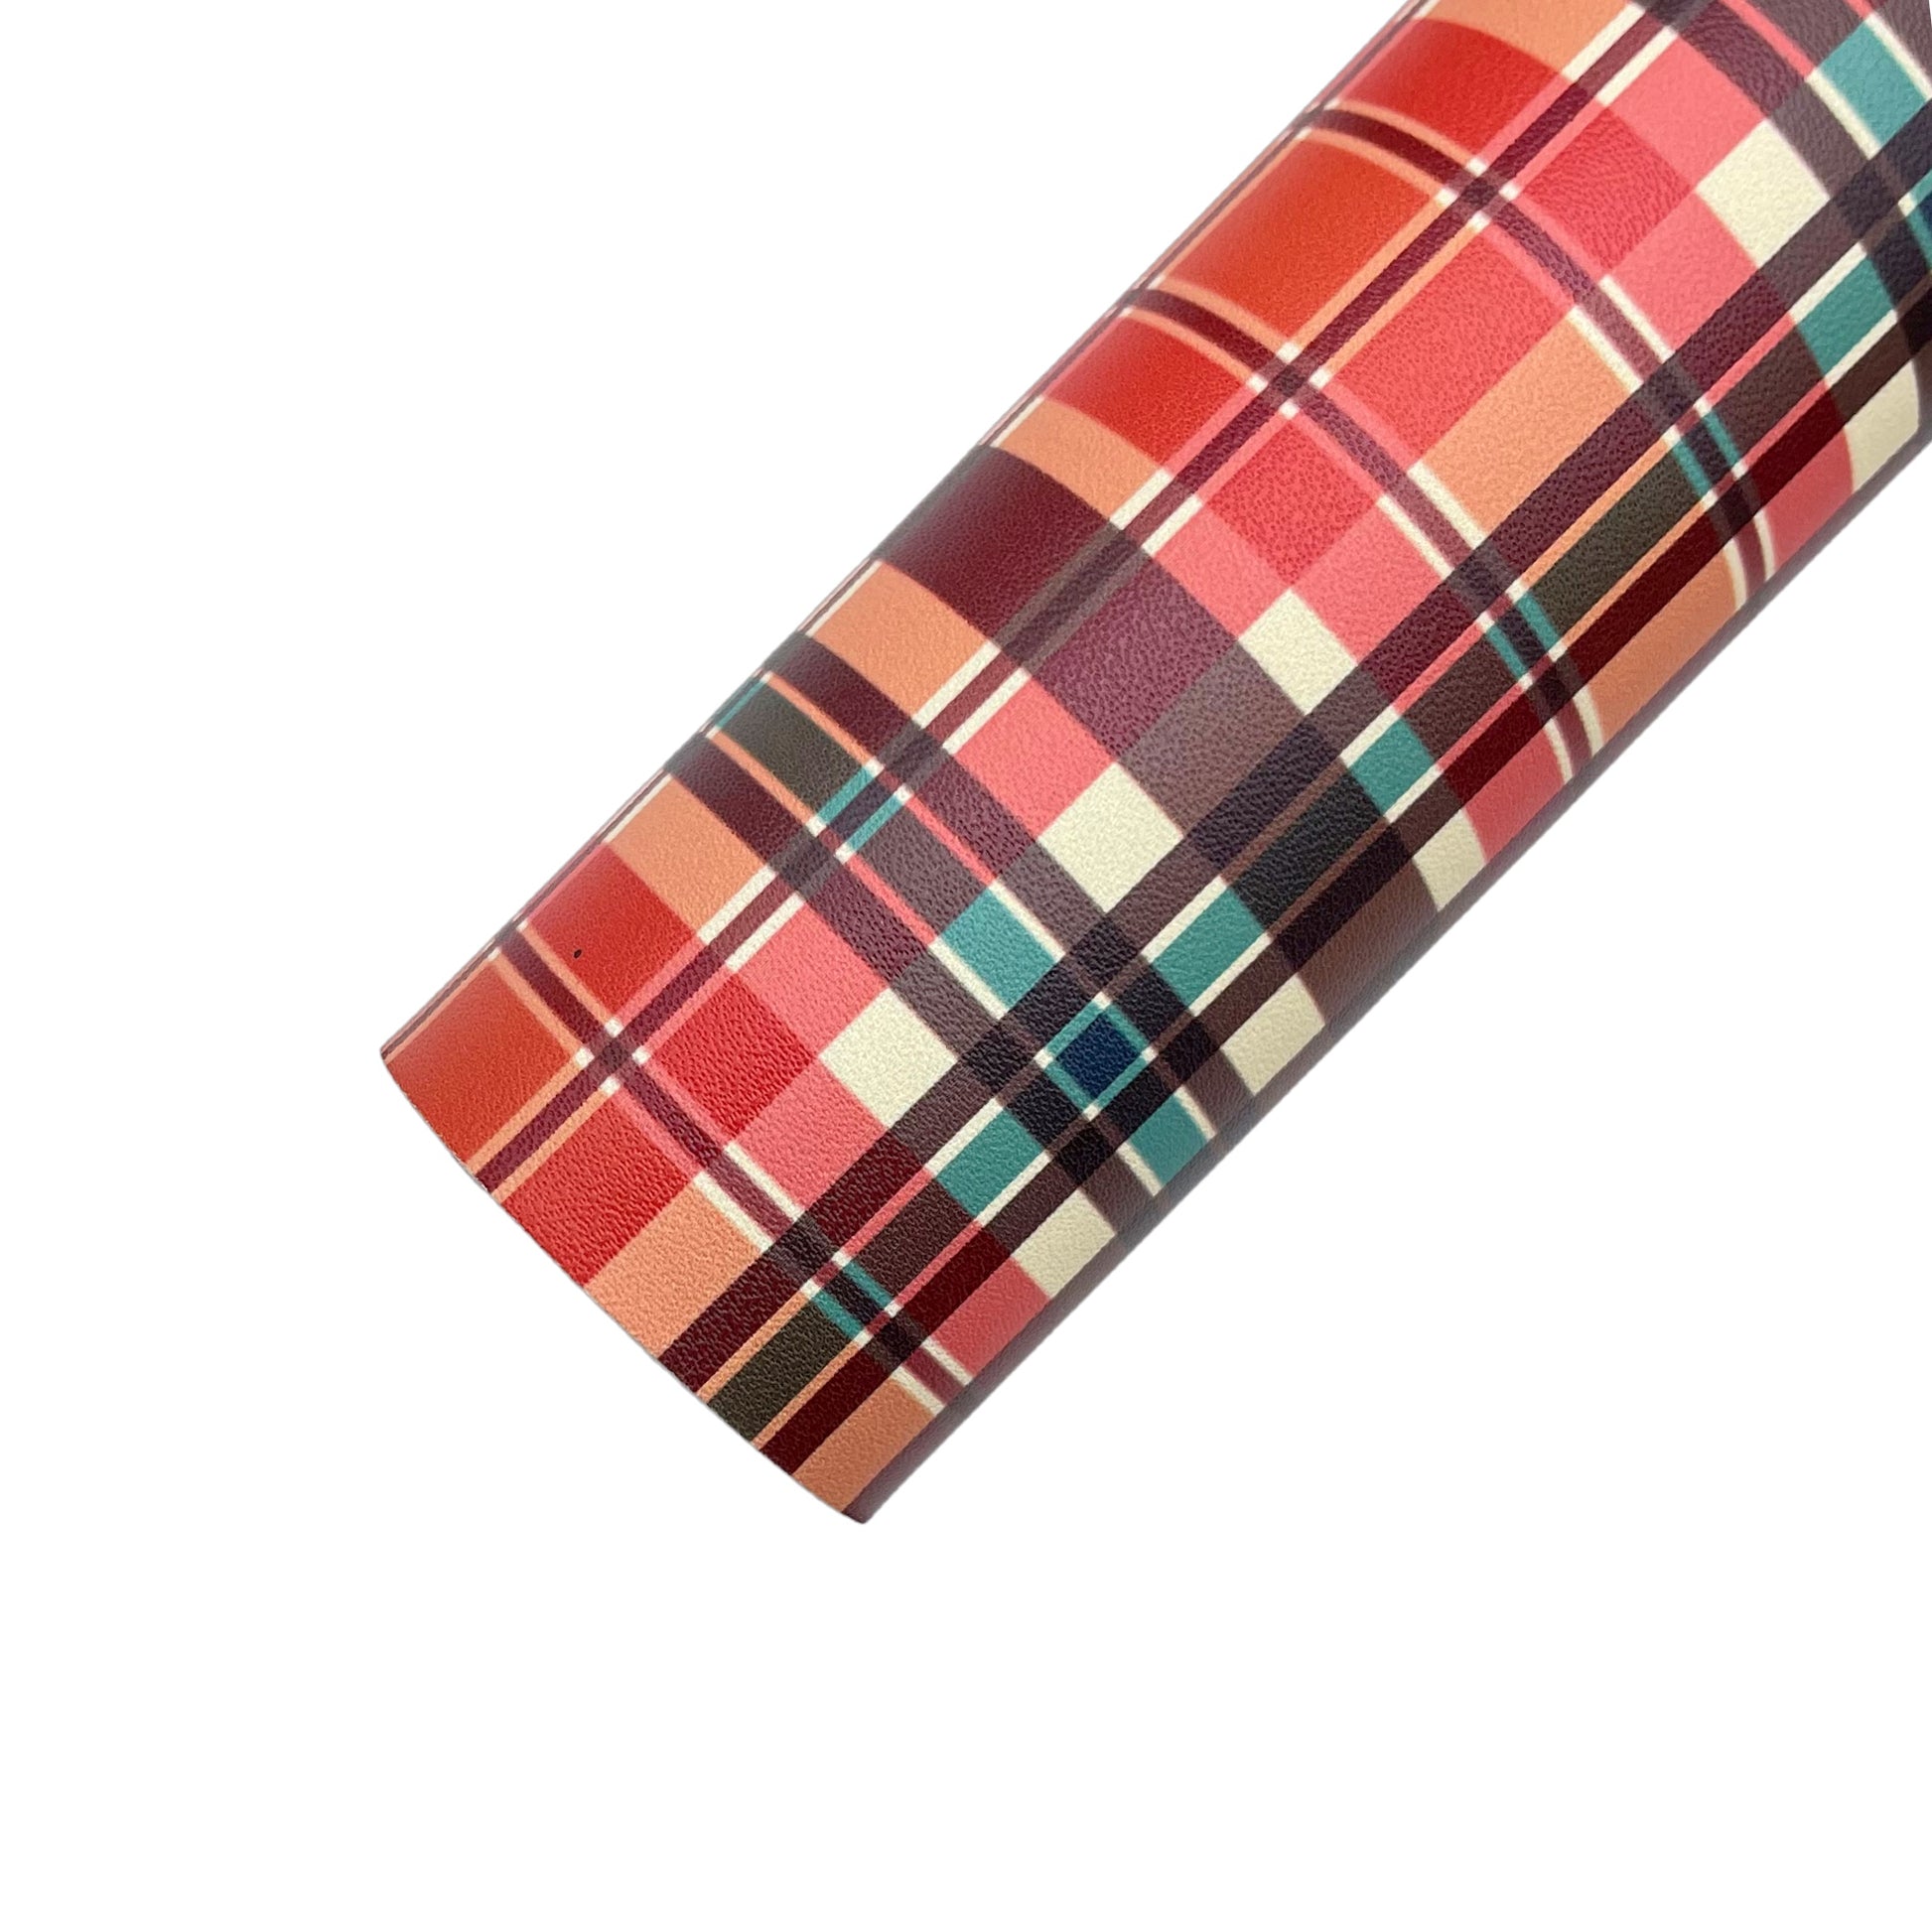 Rolled faux leather sheet with red, brown, teal, and orange plaid.